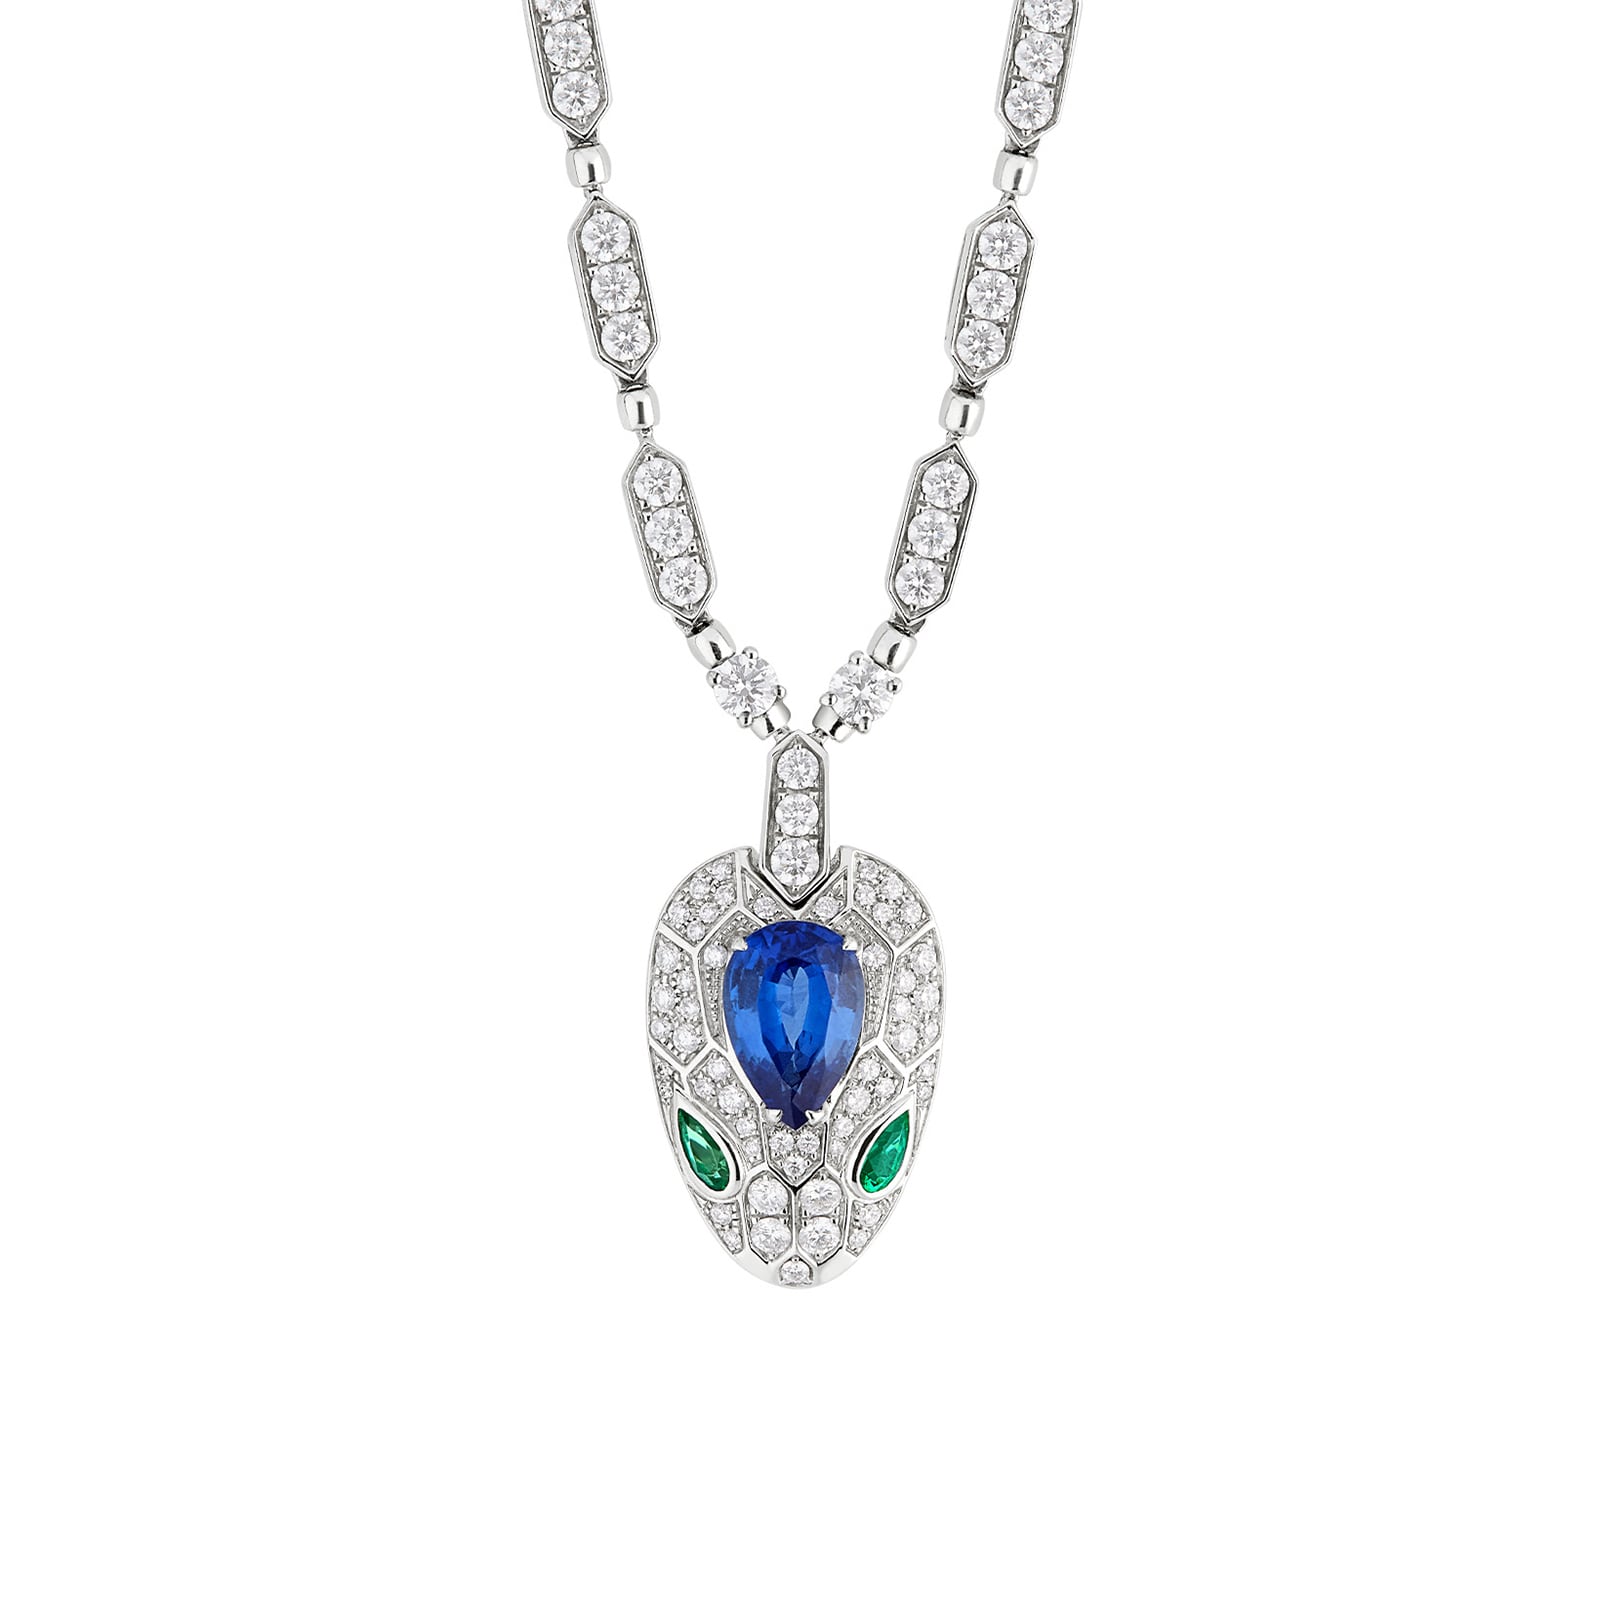 18k White Gold 4.59cttw Diamond And 1.48cttw Sapphire Serpenti Necklace